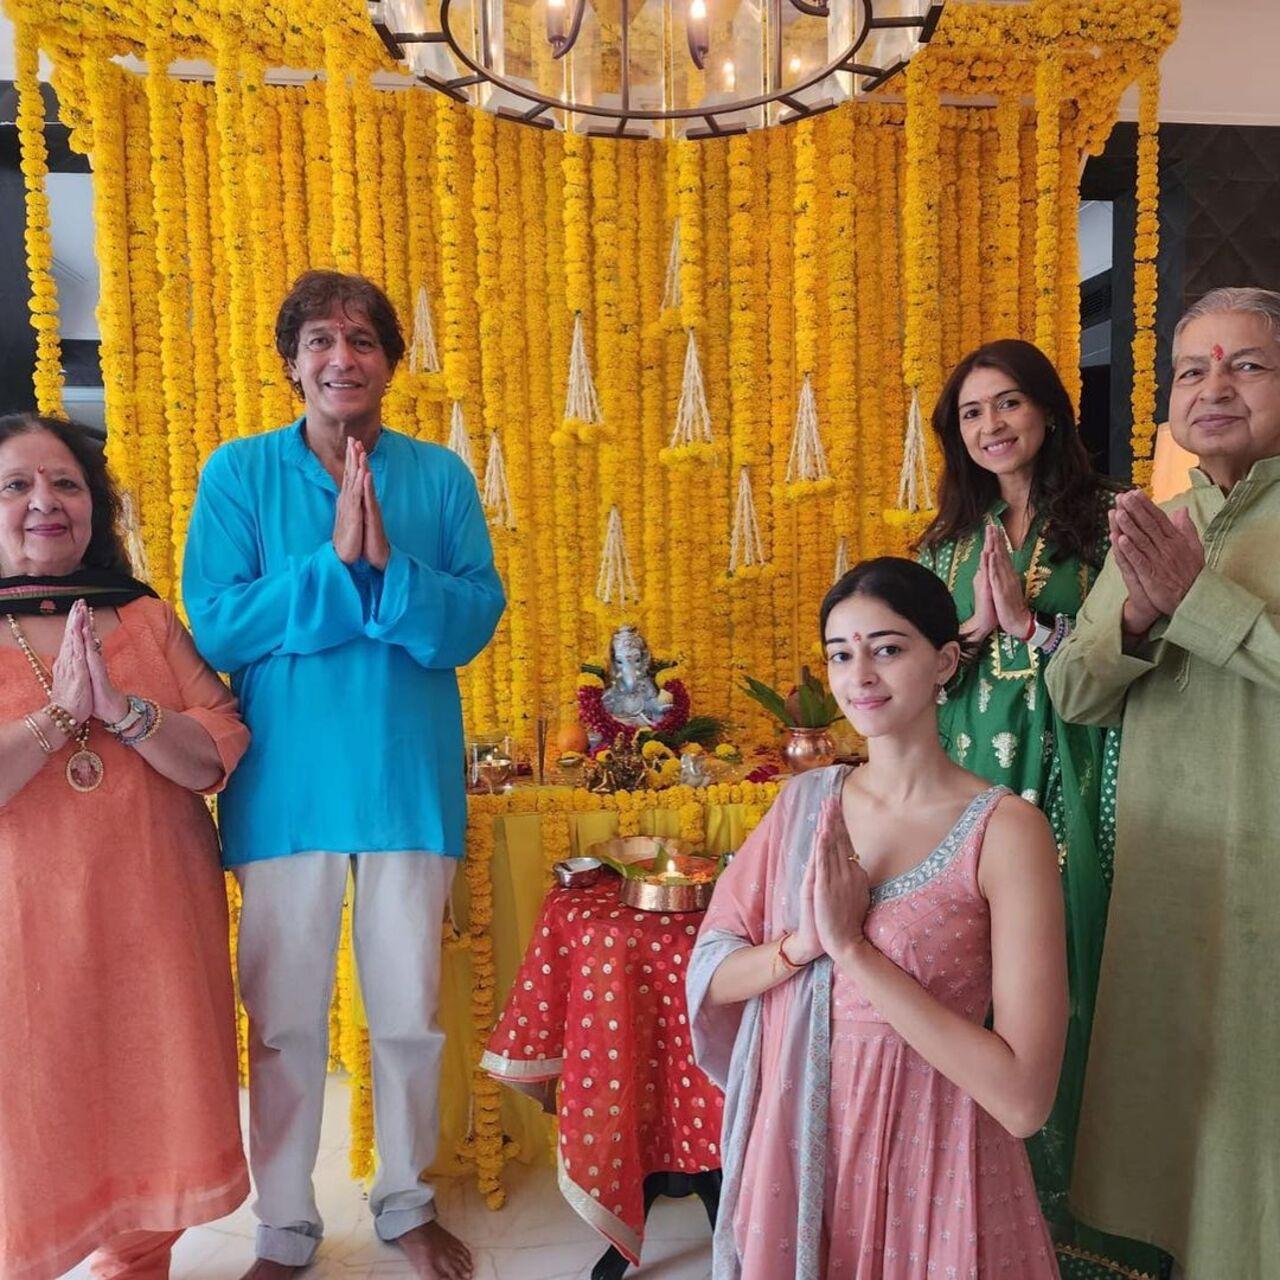 Ananya Panday returned from her holiday just in time for the festive season. She shared a picture with her family where all are seen dressed in traditional attire